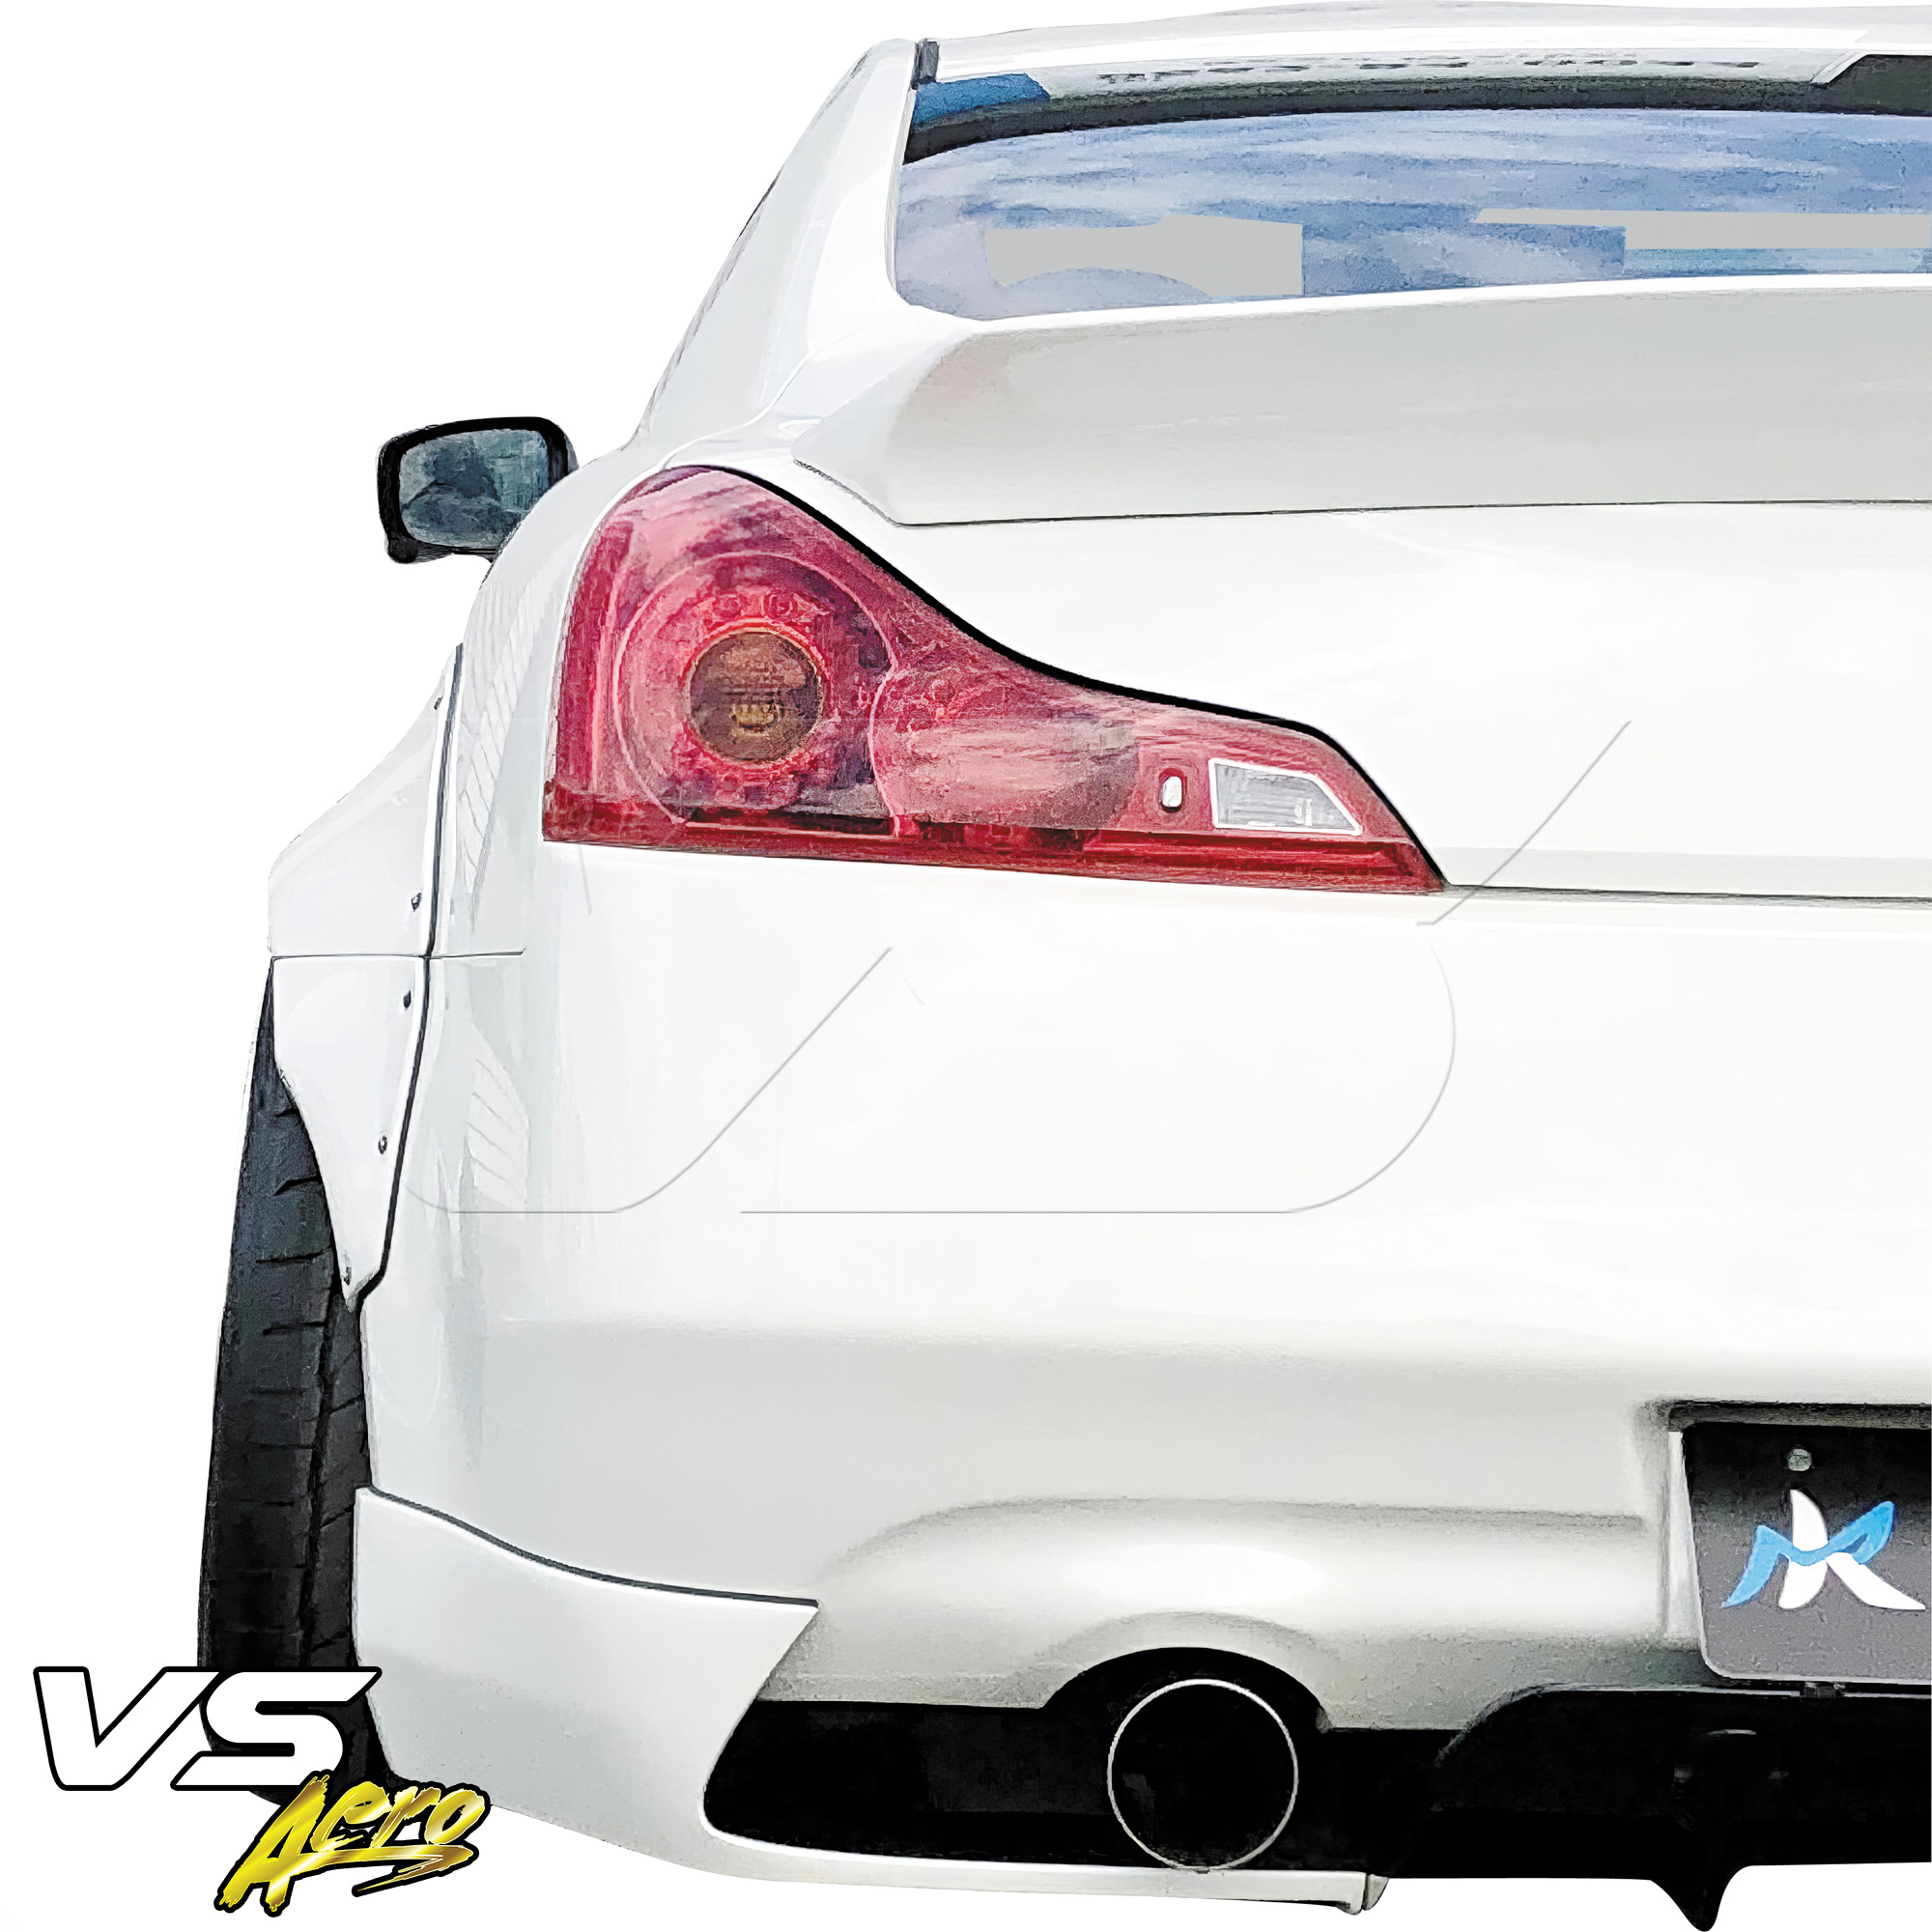 VSaero FRP LBPE Wide Body Fender Flares (rear) 4pc > Infiniti G37 Coupe 2008-2015 > 2dr Coupe - Image 35